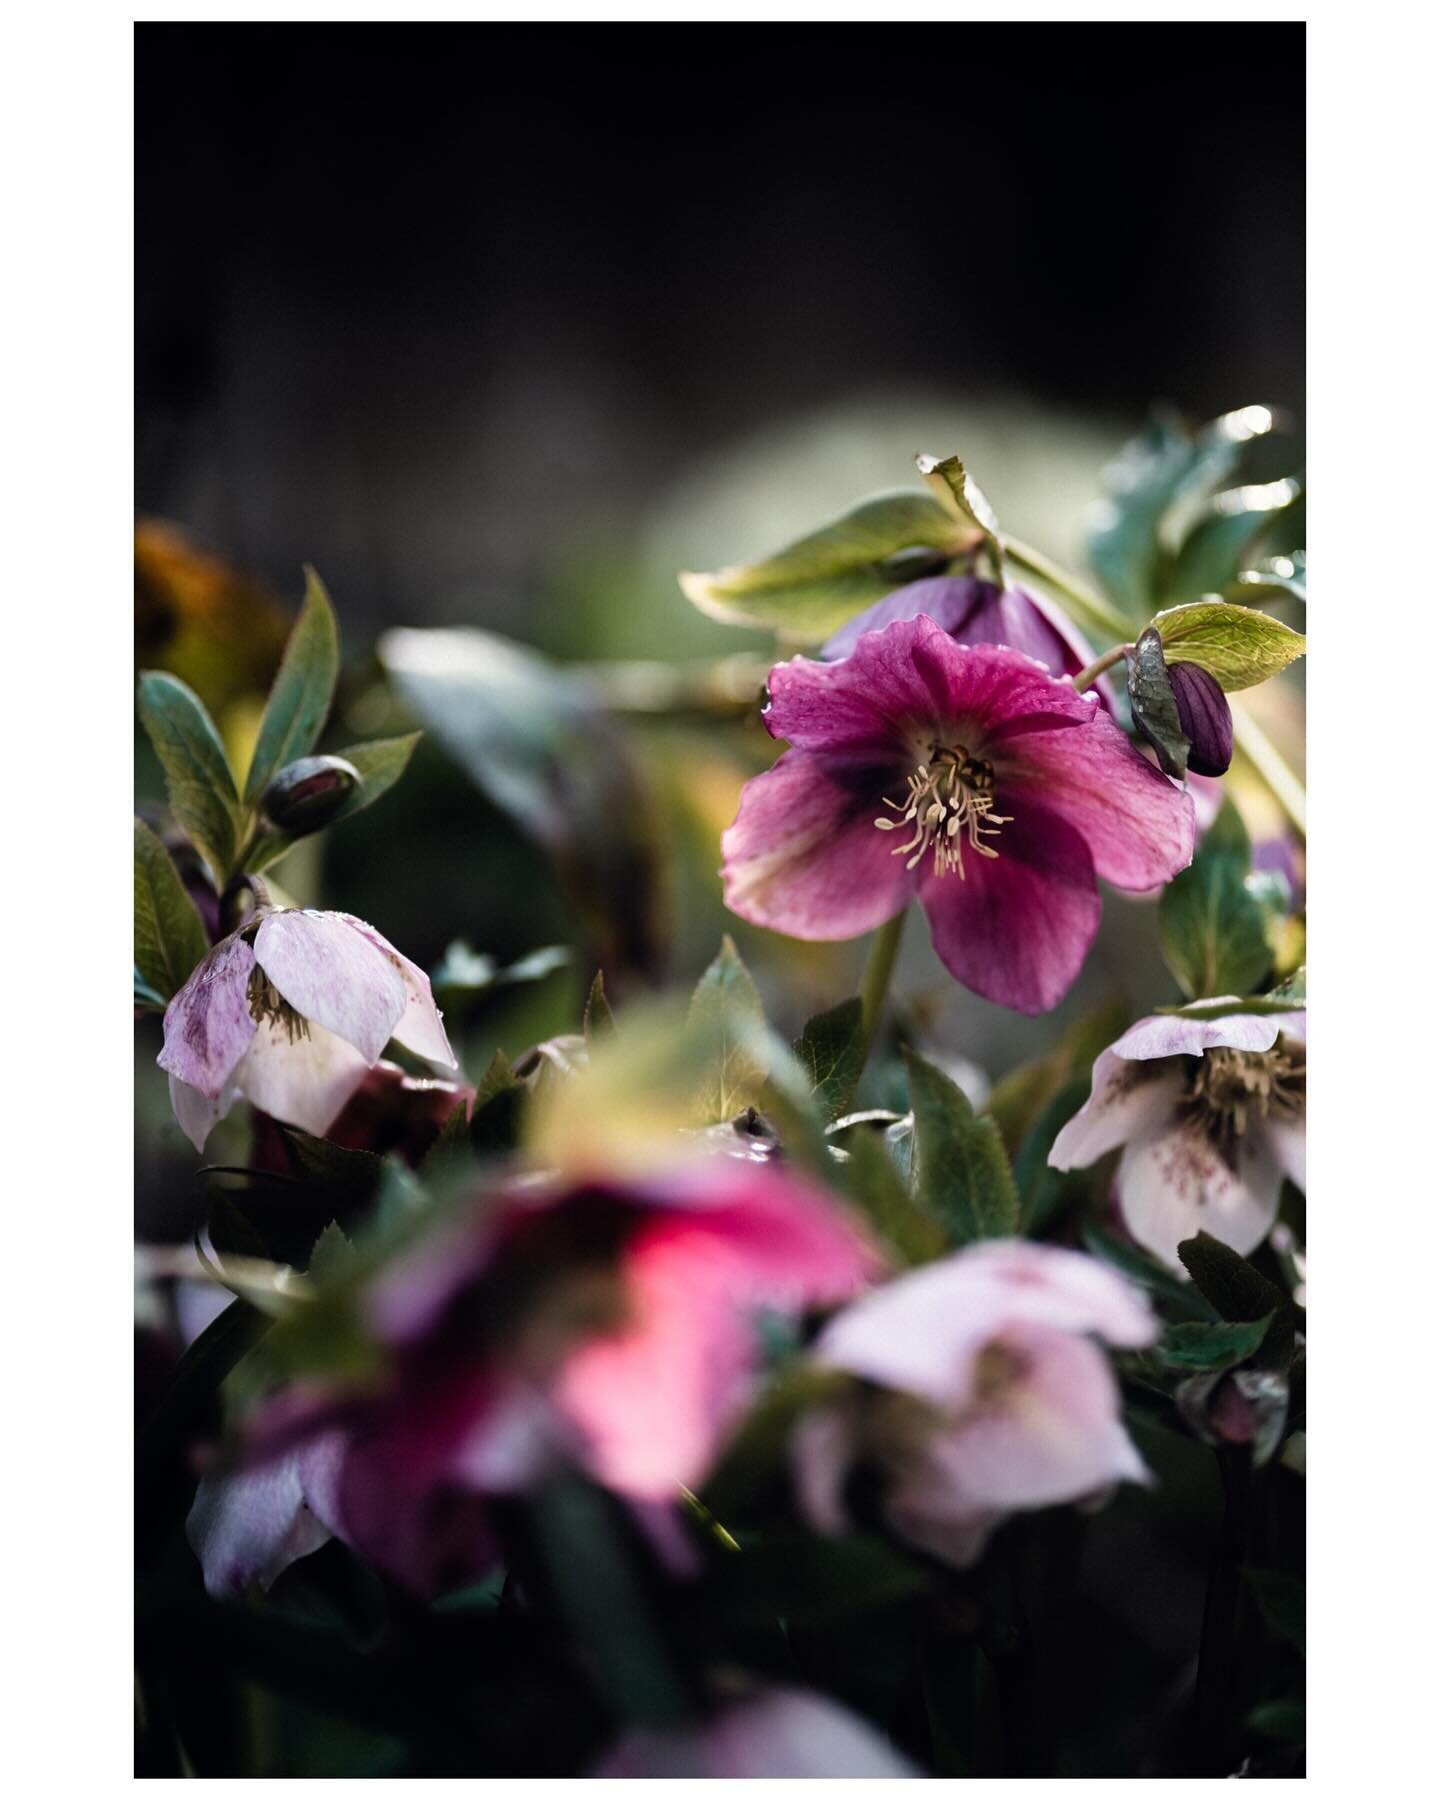 Hellebores - adding a touch of magic to my frosty garden.
.
Some species go by the lovely names of Lenten rose, Snow rose and Bear&rsquo;s foot 😃
.
At the moment the hellebores in our garden are just a few buds but soon they will be in full bloom - 